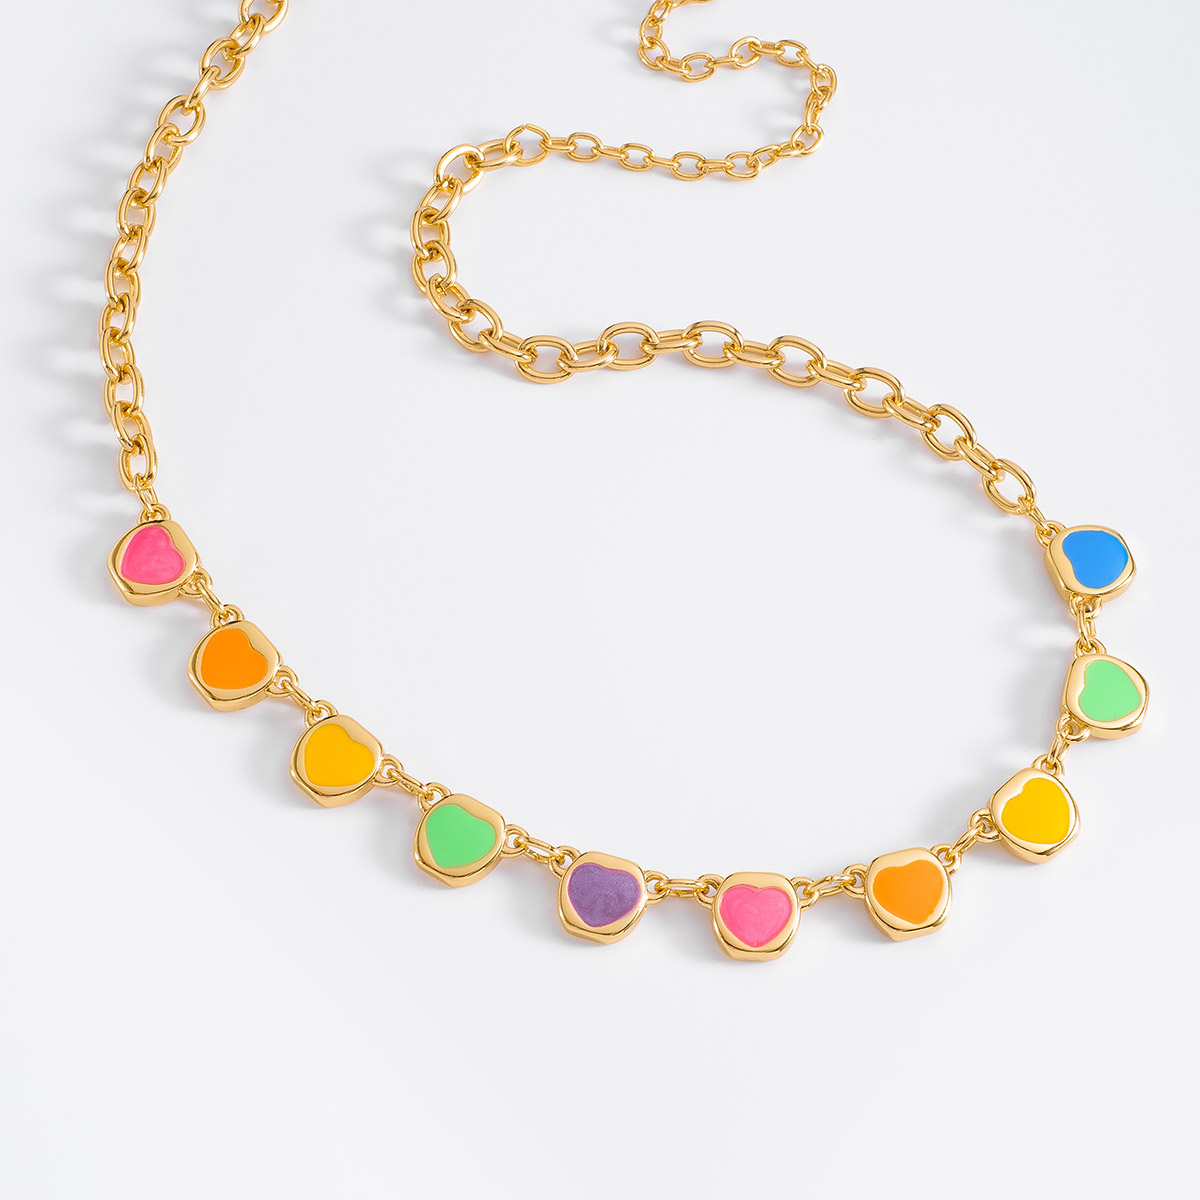 Colorful necklace in gold plating, accompanied by circular charms with heart designs in pink, green, yellow, orange, and blue enamel.
-        Necklace
-        42 cm + 20 cm ext.
-        18k gold plating
-        Enamel in pink, green, yellow, orange, and blue tones
